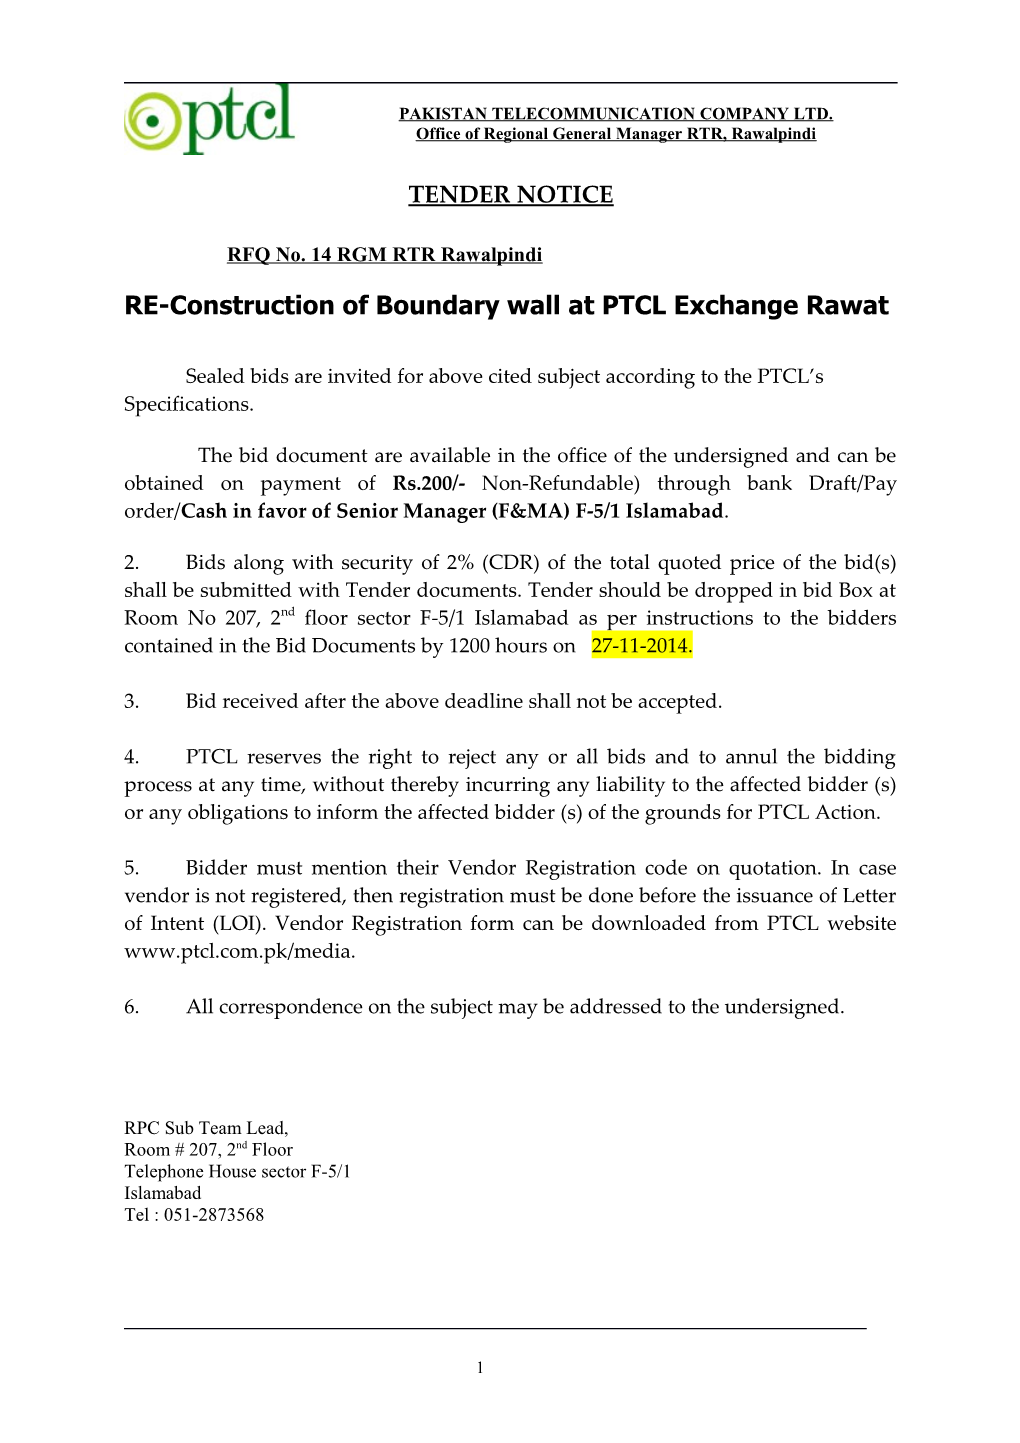 RE-Construction of Boundary Wall at PTCL Exchange Rawat